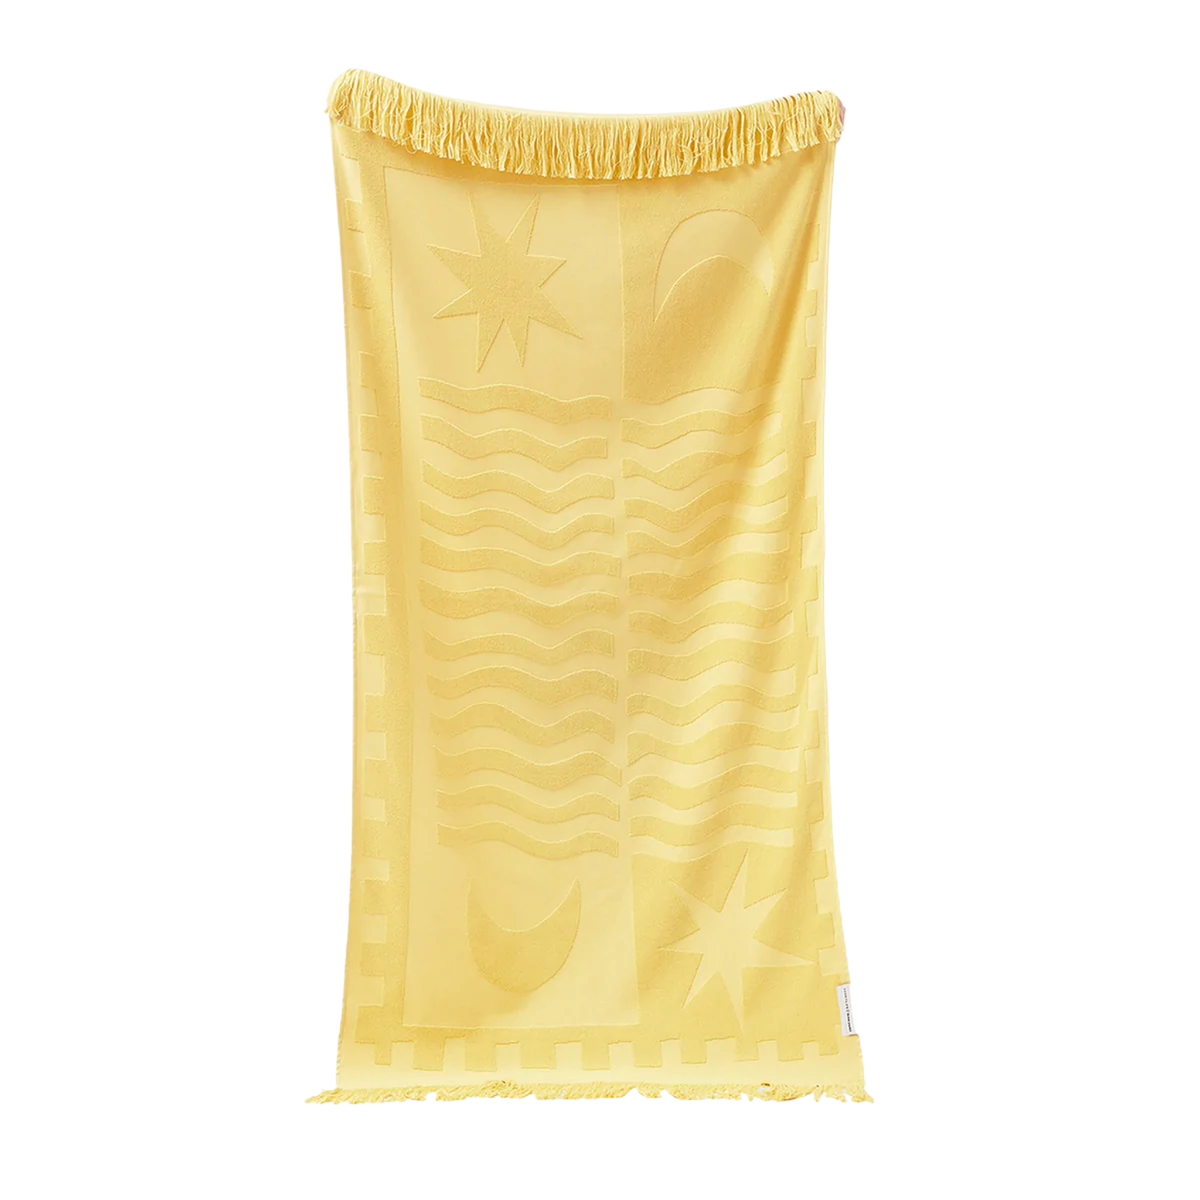 LUXE TOWEL 100% COTTON - SKINNY DIPPER